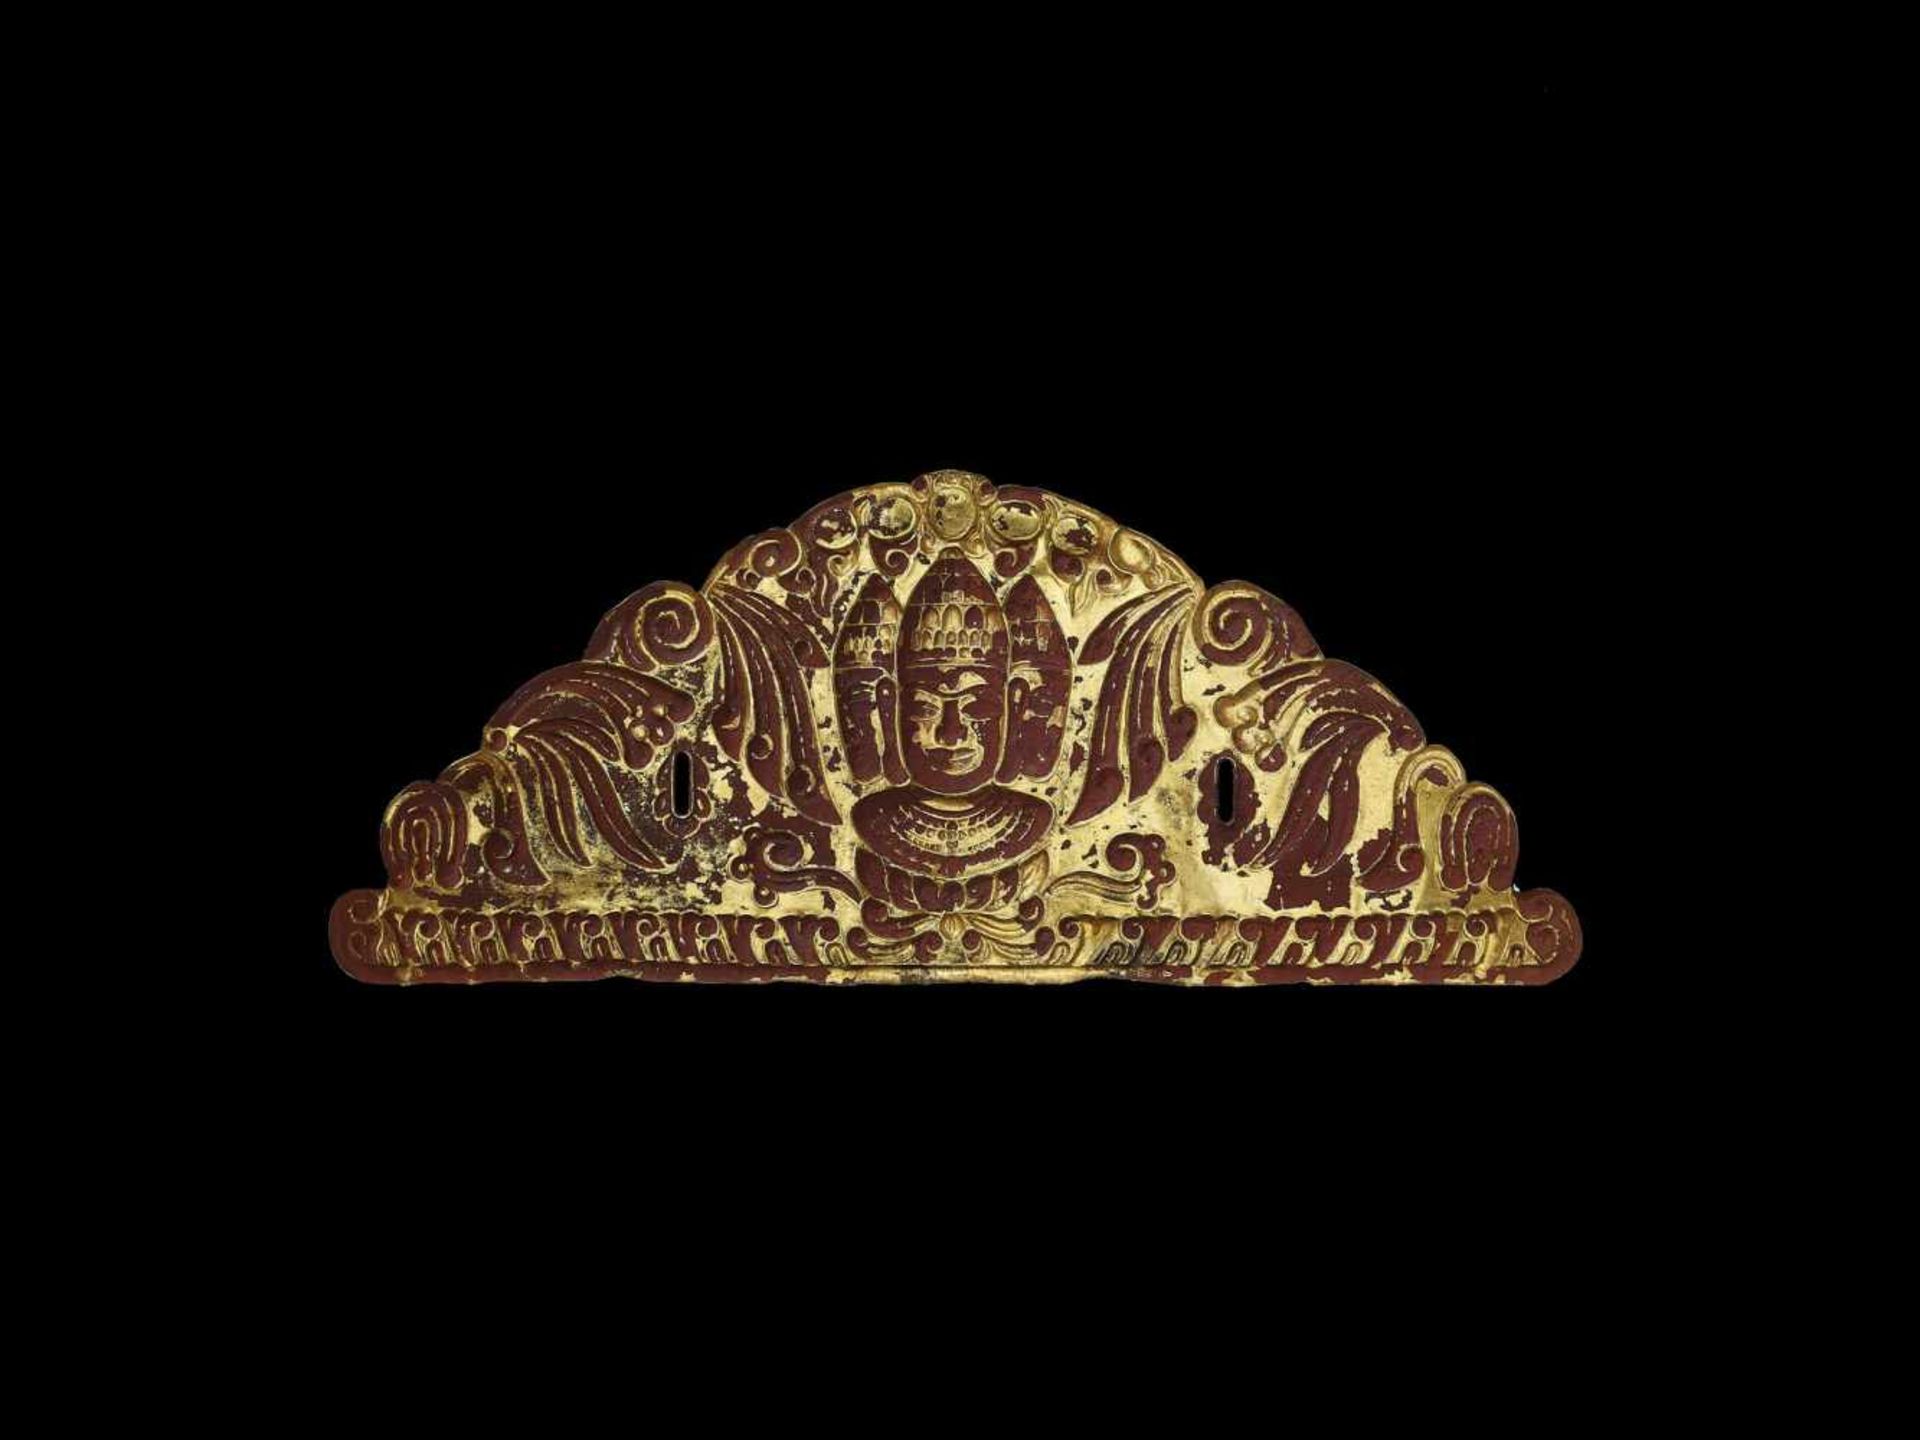 AN EXCELLENT AND VERY RARE CHAM REPOUSSÉ GOLD DIADEM DEPICTING BRAHMA Central Cham kingdom, - Image 3 of 3